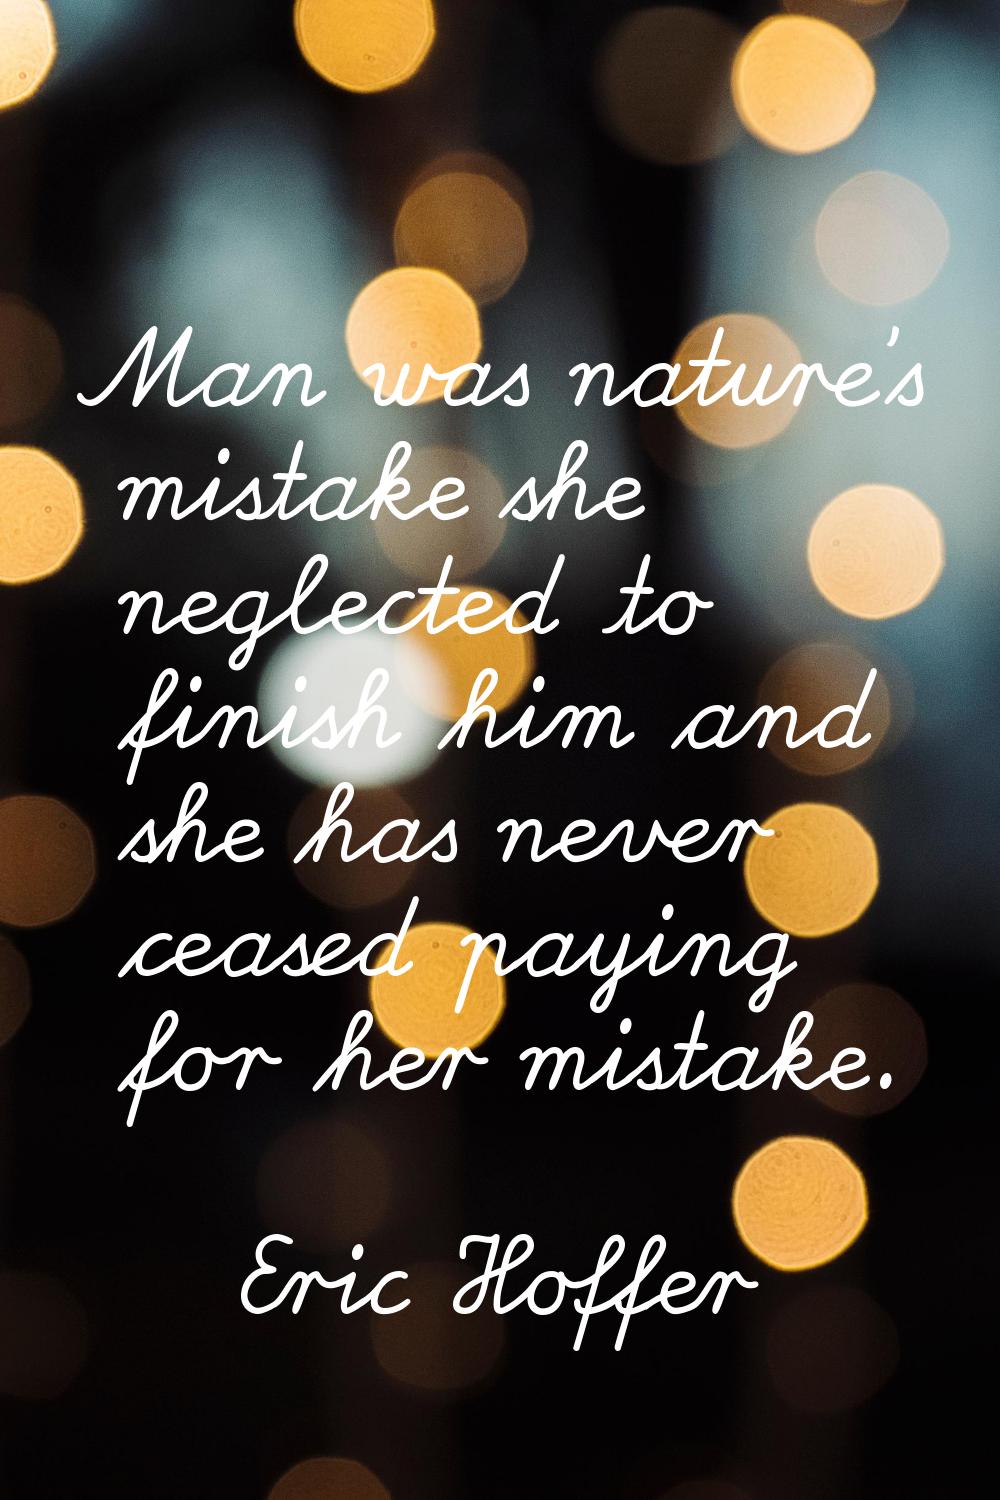 Man was nature's mistake she neglected to finish him and she has never ceased paying for her mistak